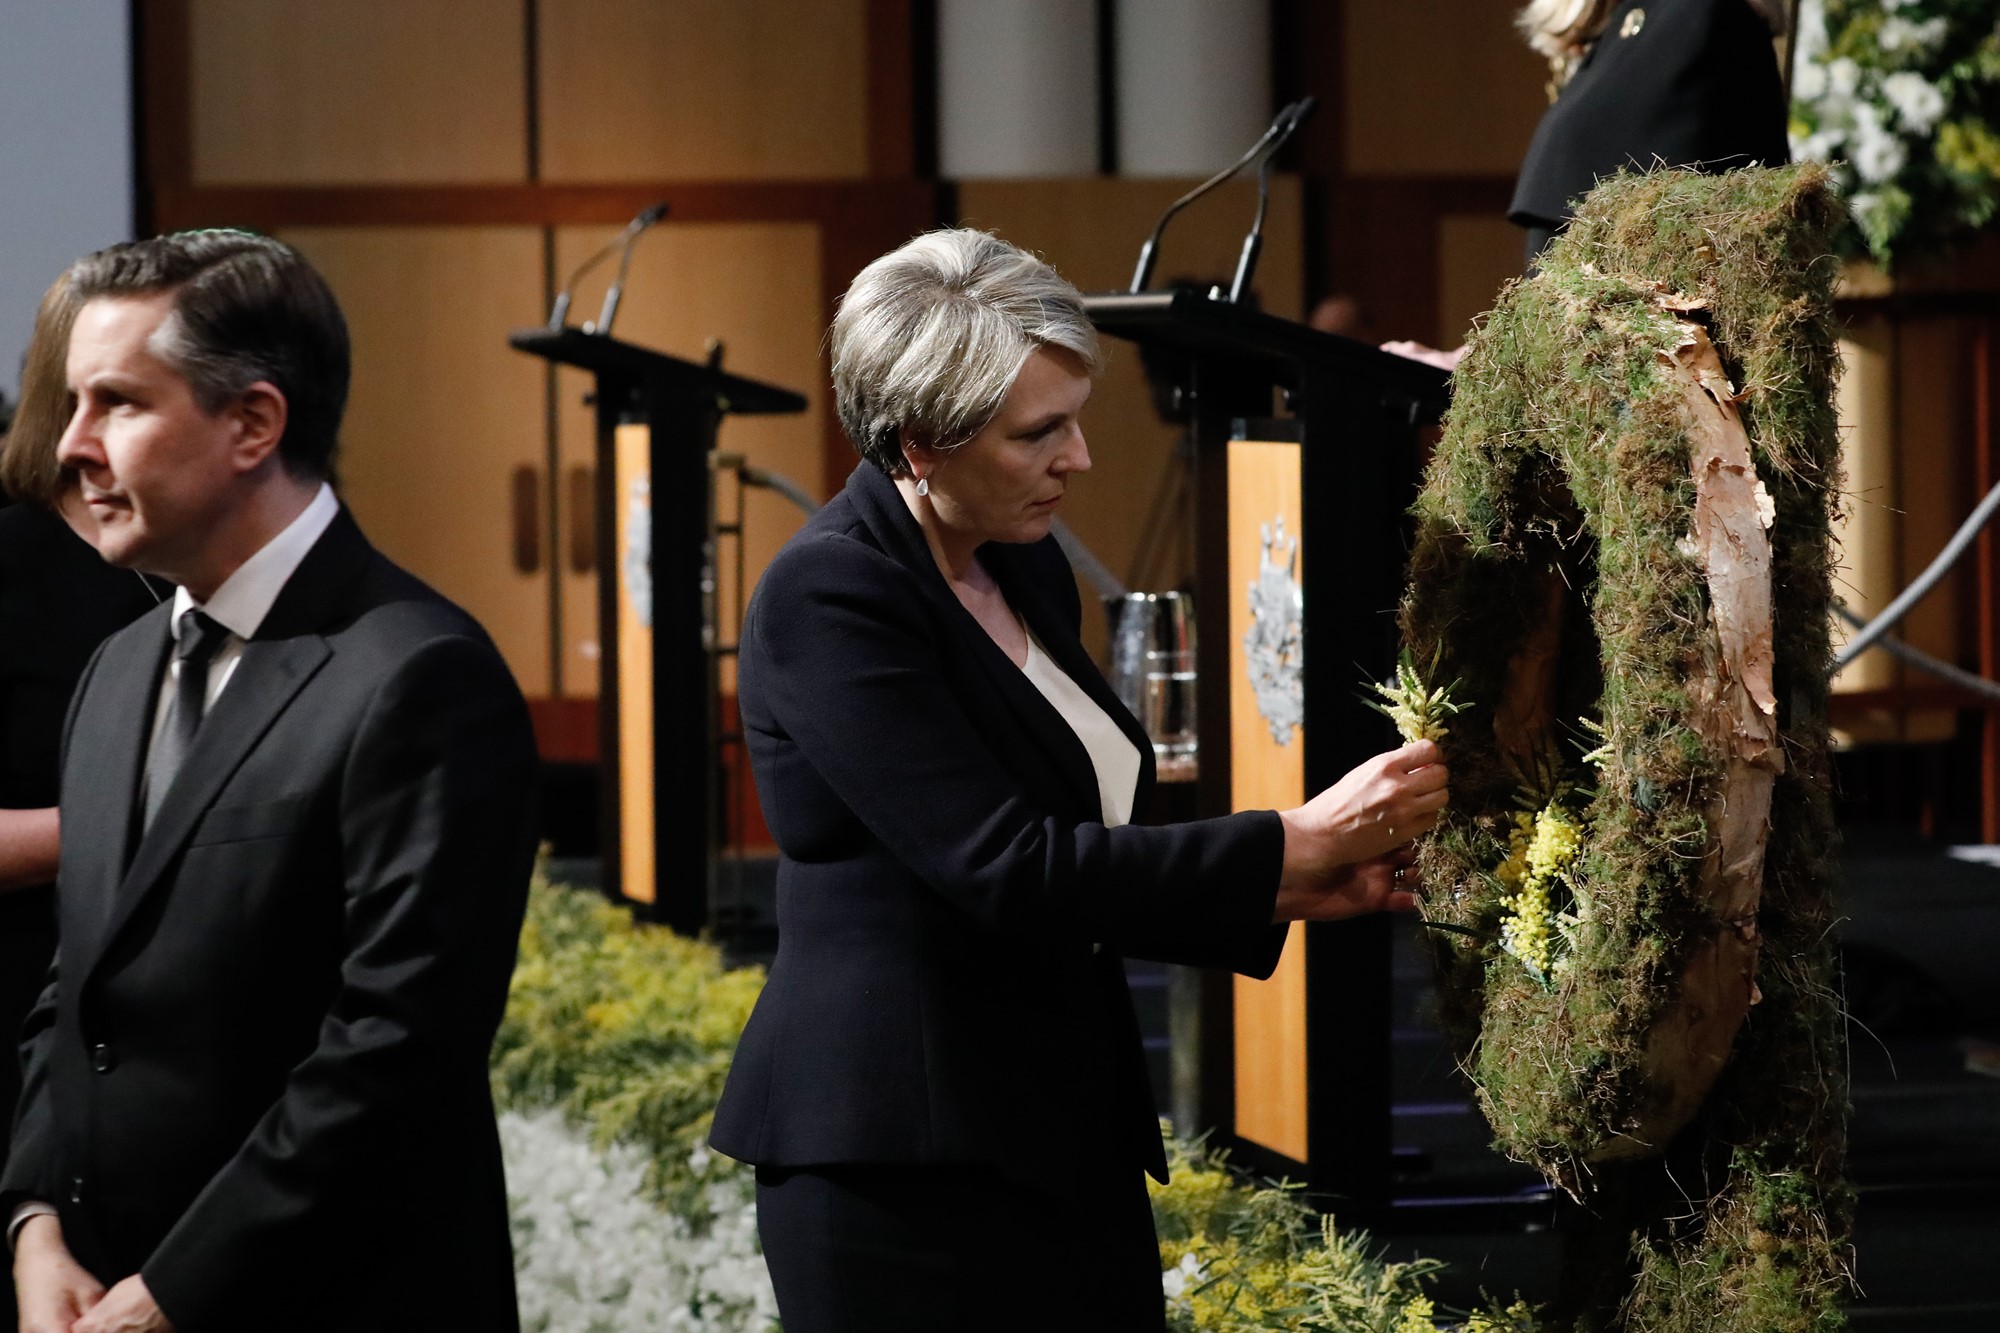 A woman places wattle on a wreath in the Great Hall.